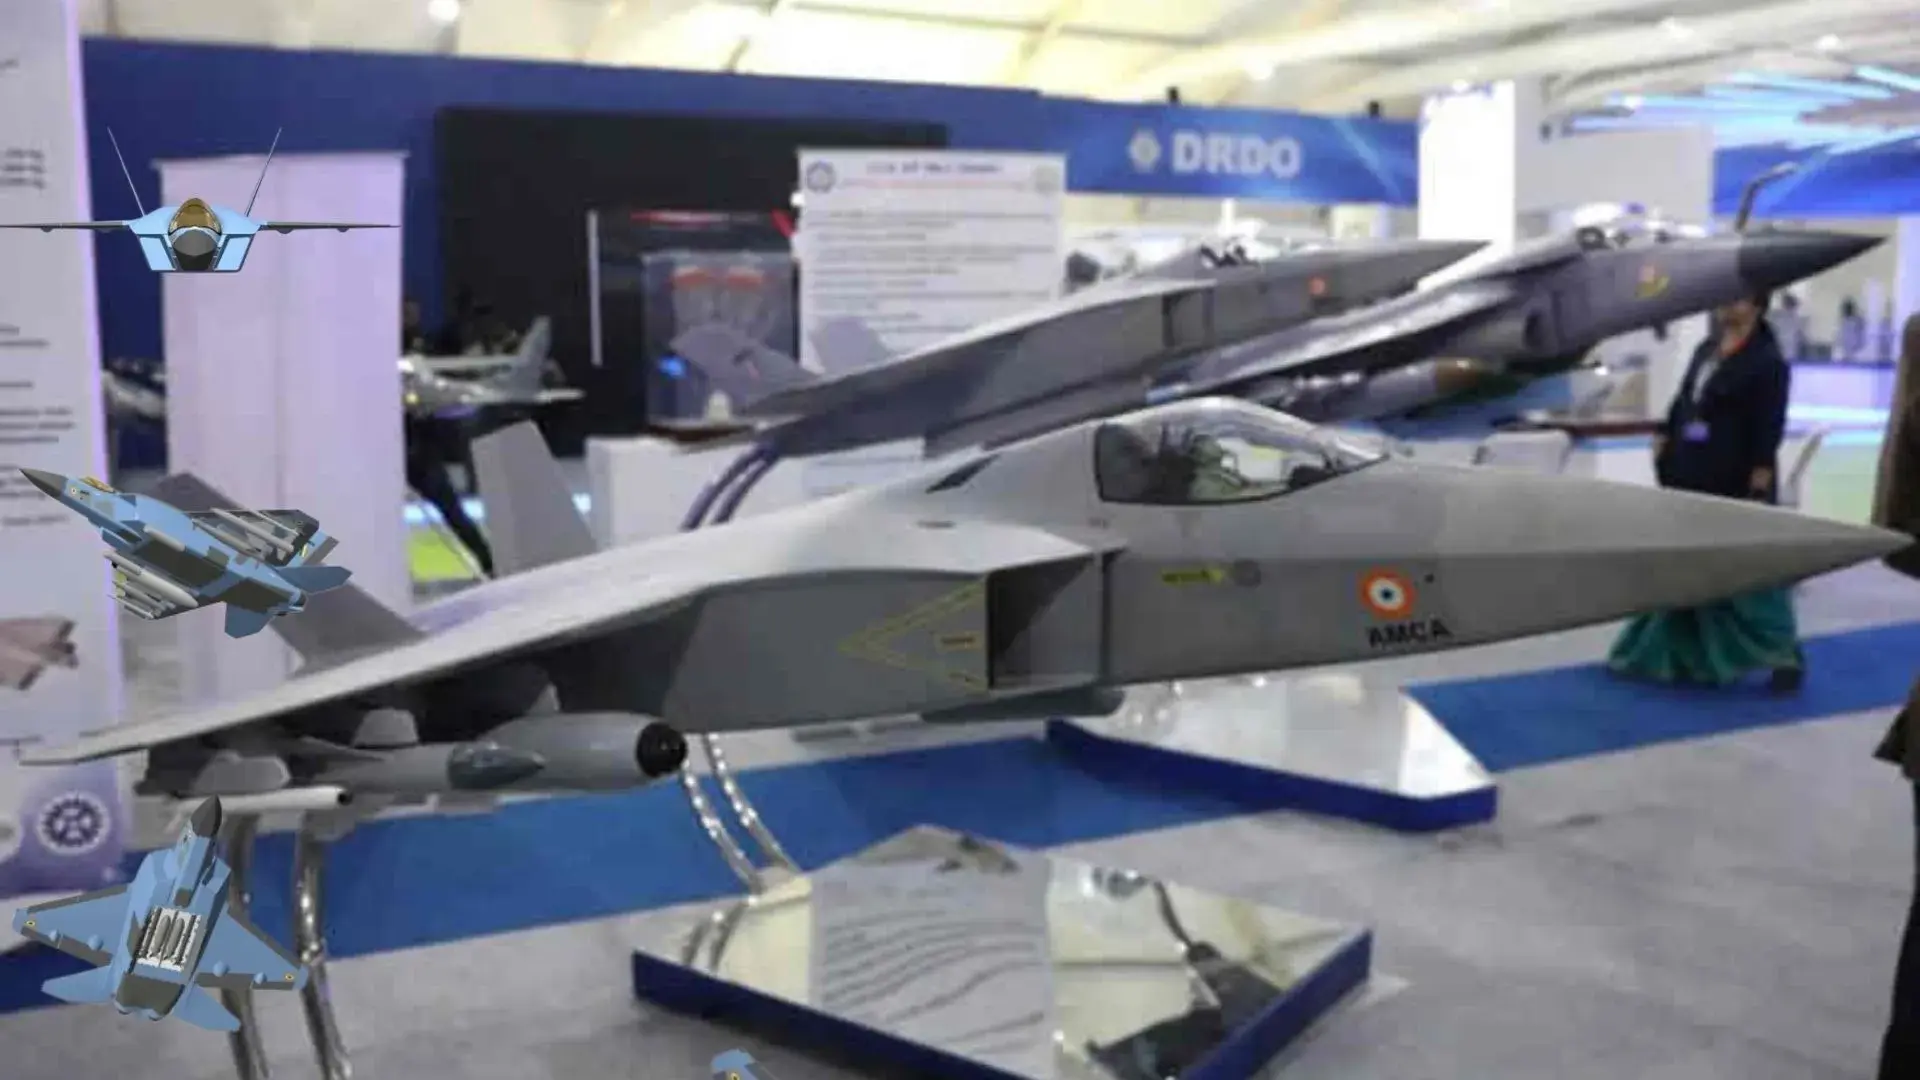 Digital rendering of India's AMCA fighter jet in action, emphasizing its stealth and agility.